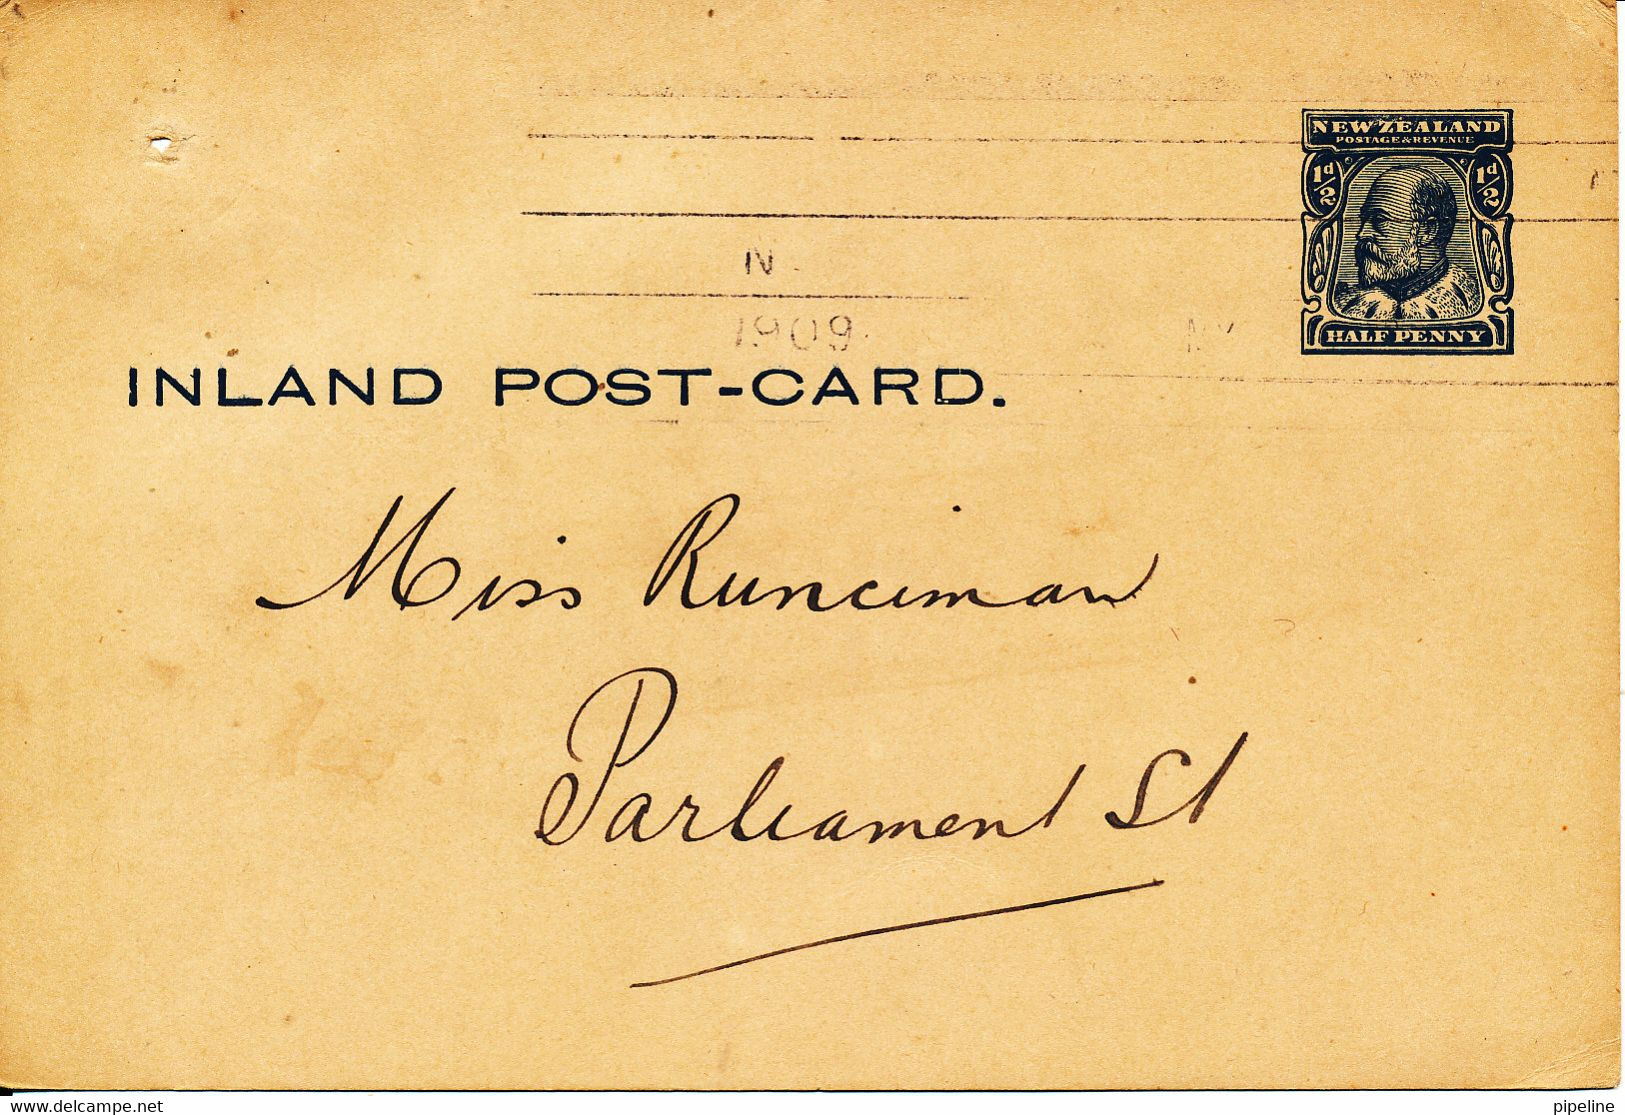 New Zealand Postal Stationery Innland Post Card 25-5-1909 With A Hole In The Left Side Near The Top - Entiers Postaux